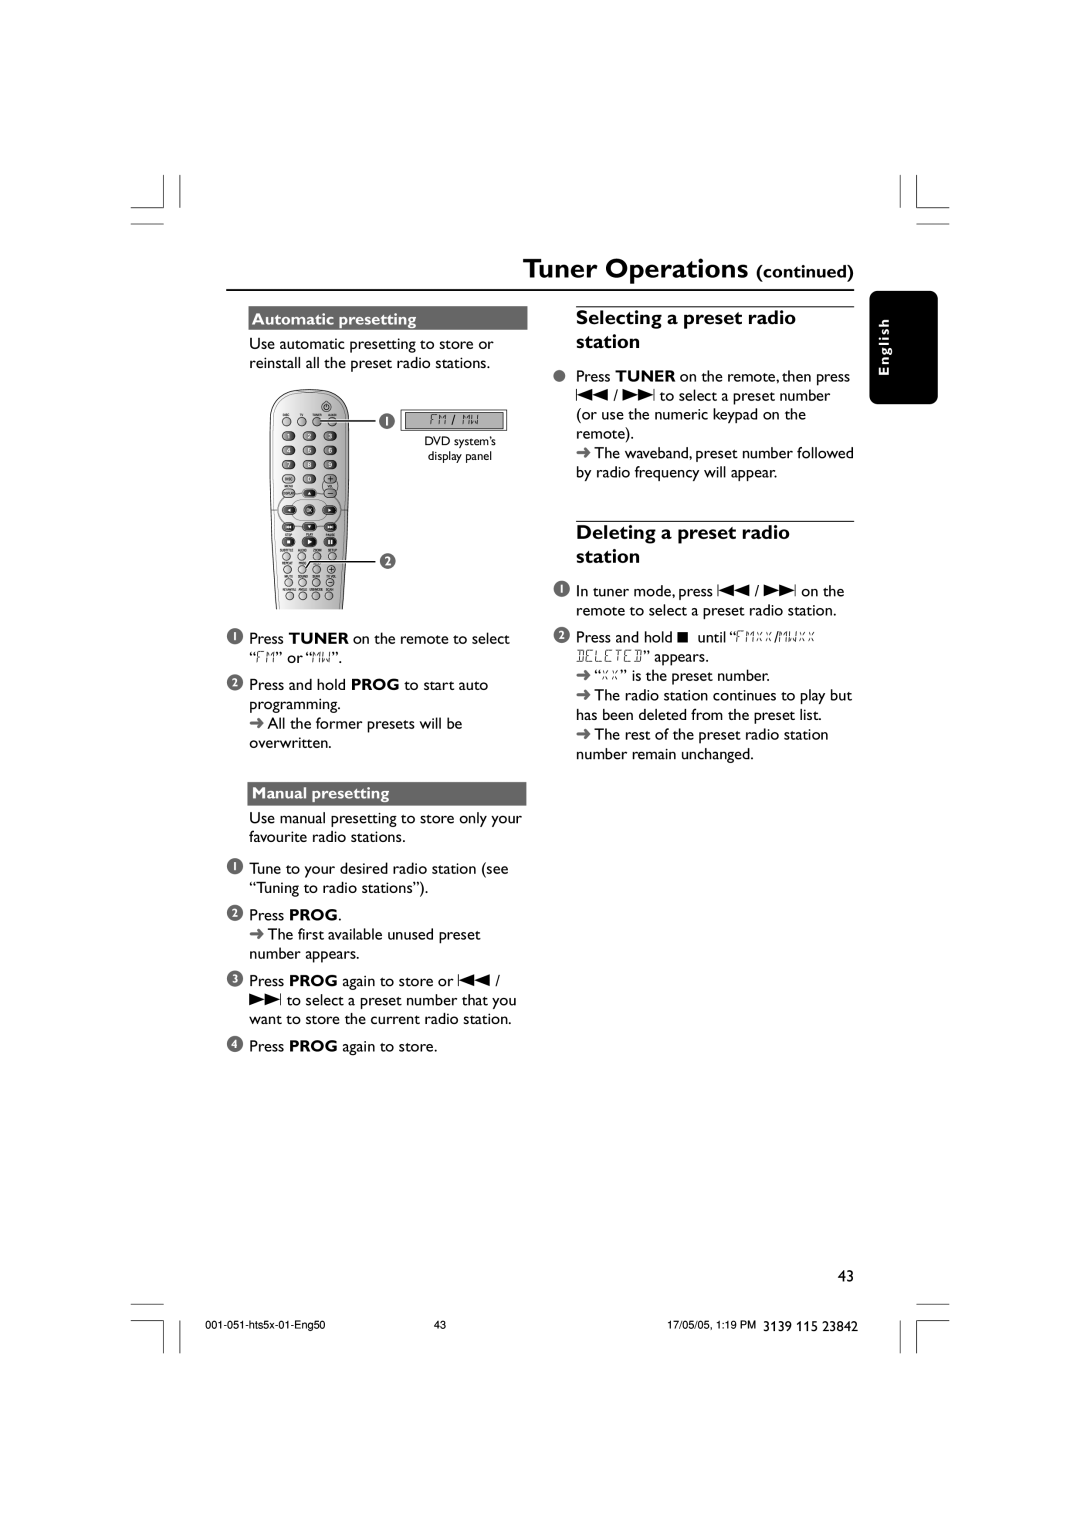 Philips HTS5000W user manual Tuner Operations continued, Selecting a preset radio station, Deleting a preset radio station 